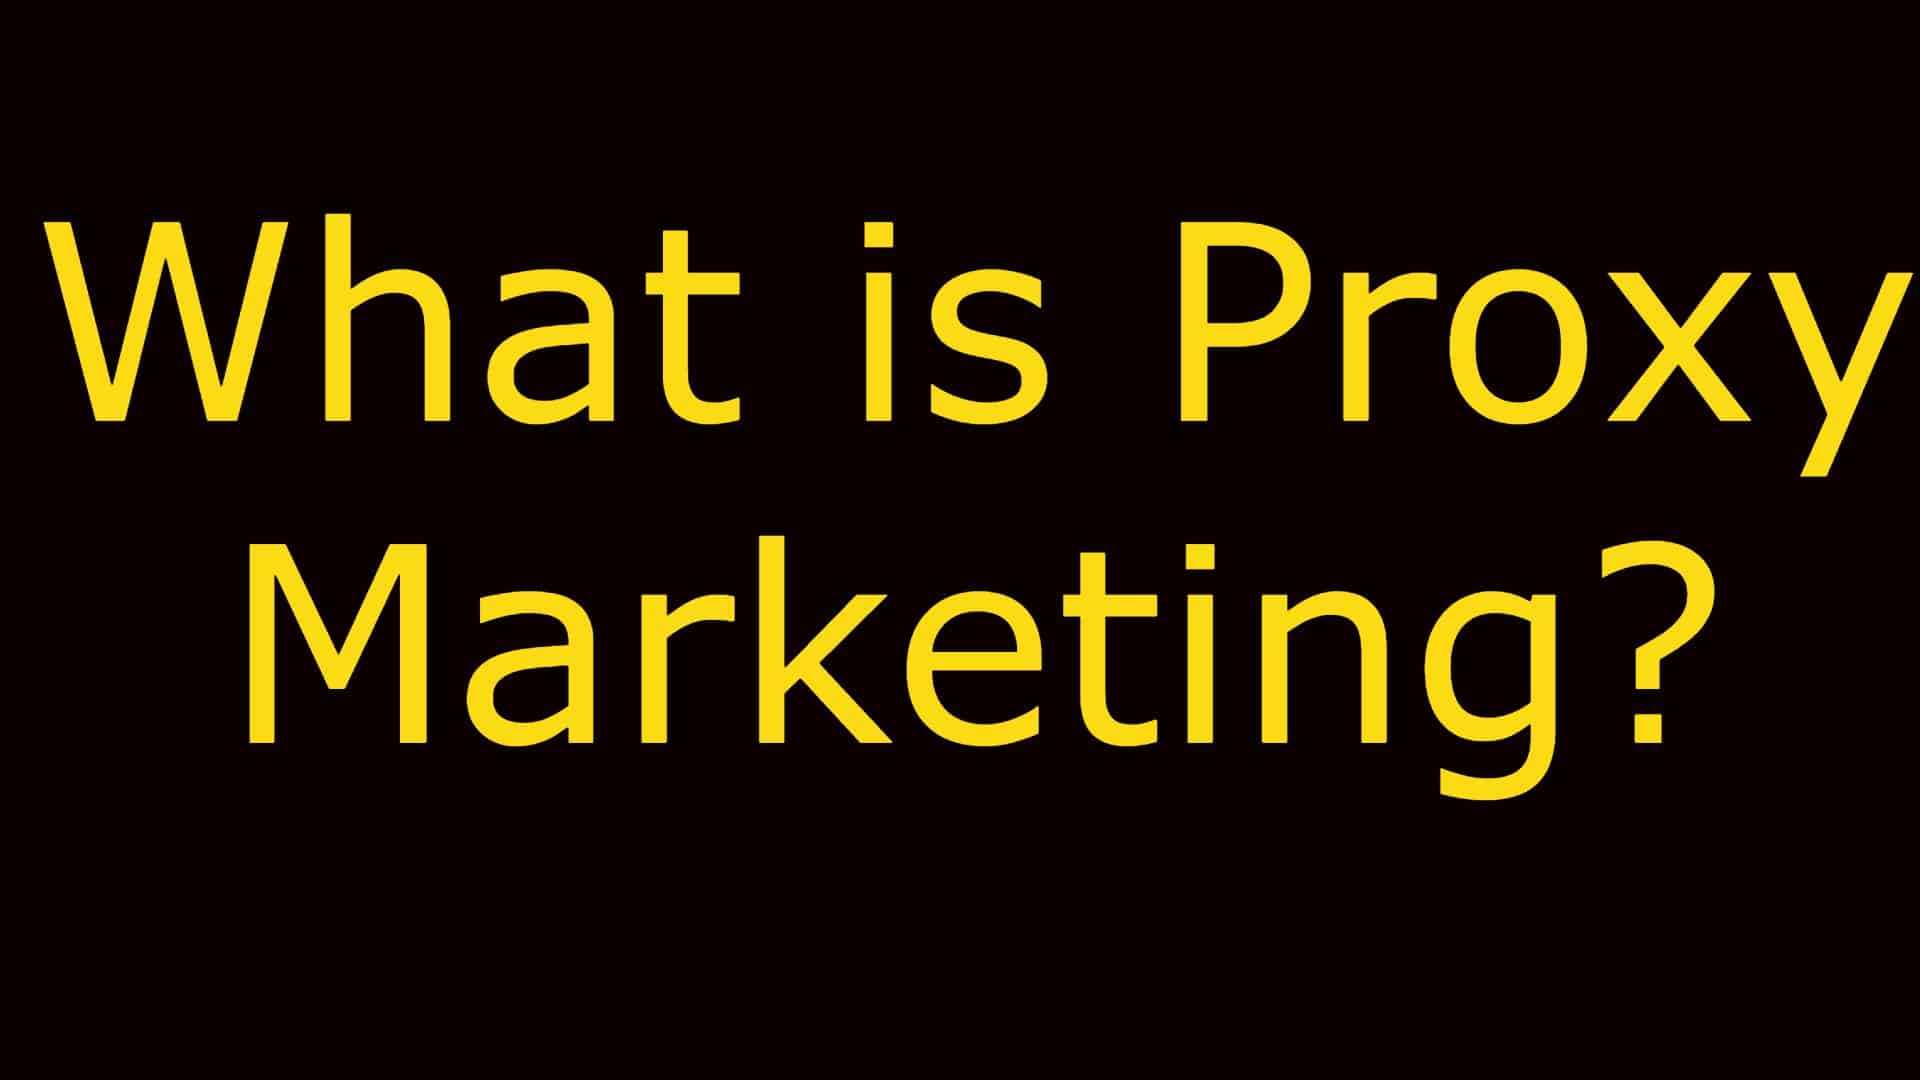 What is Proxy Marketing